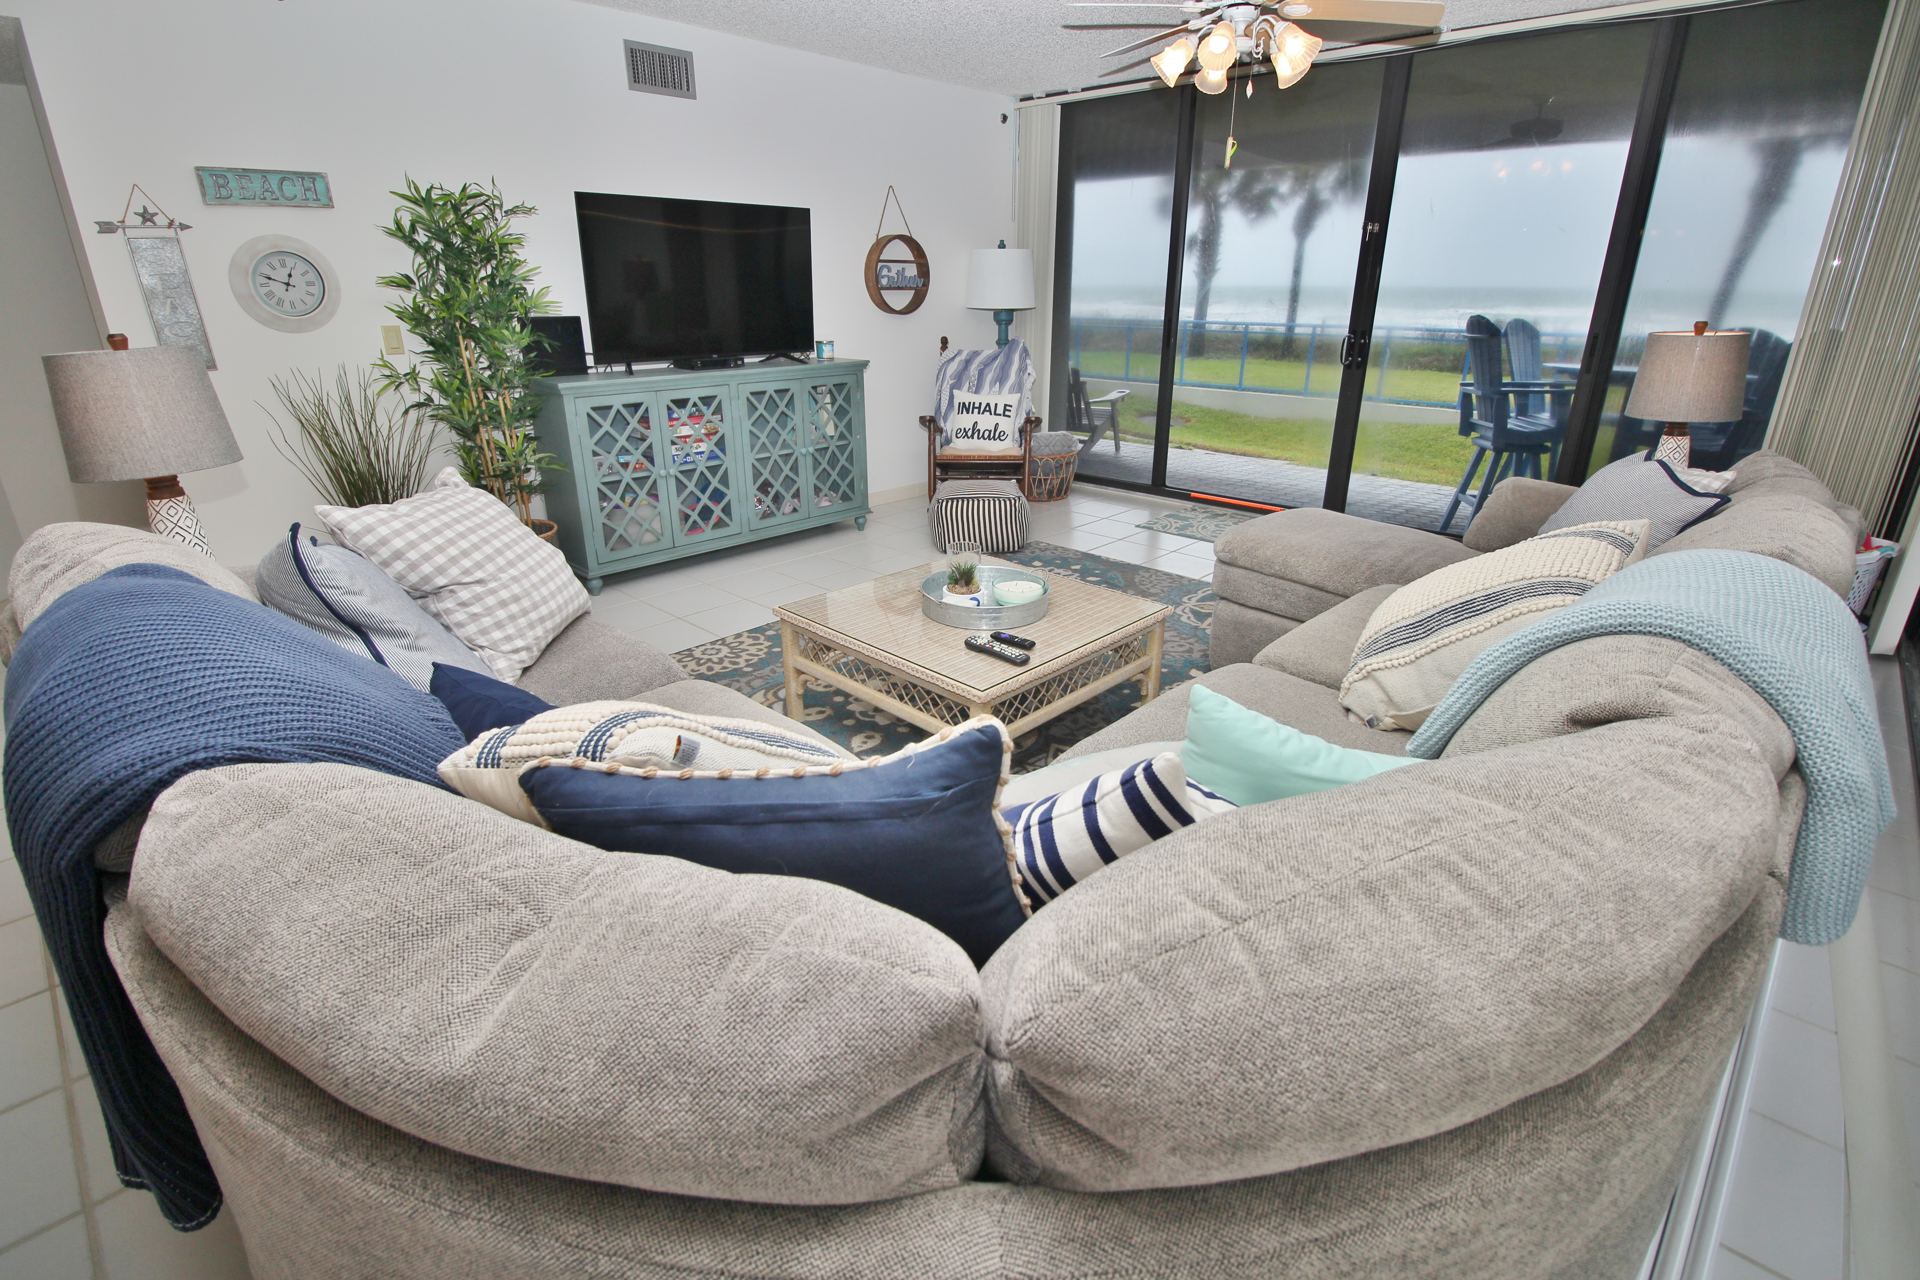 Large Sofa in Living Room with Great View